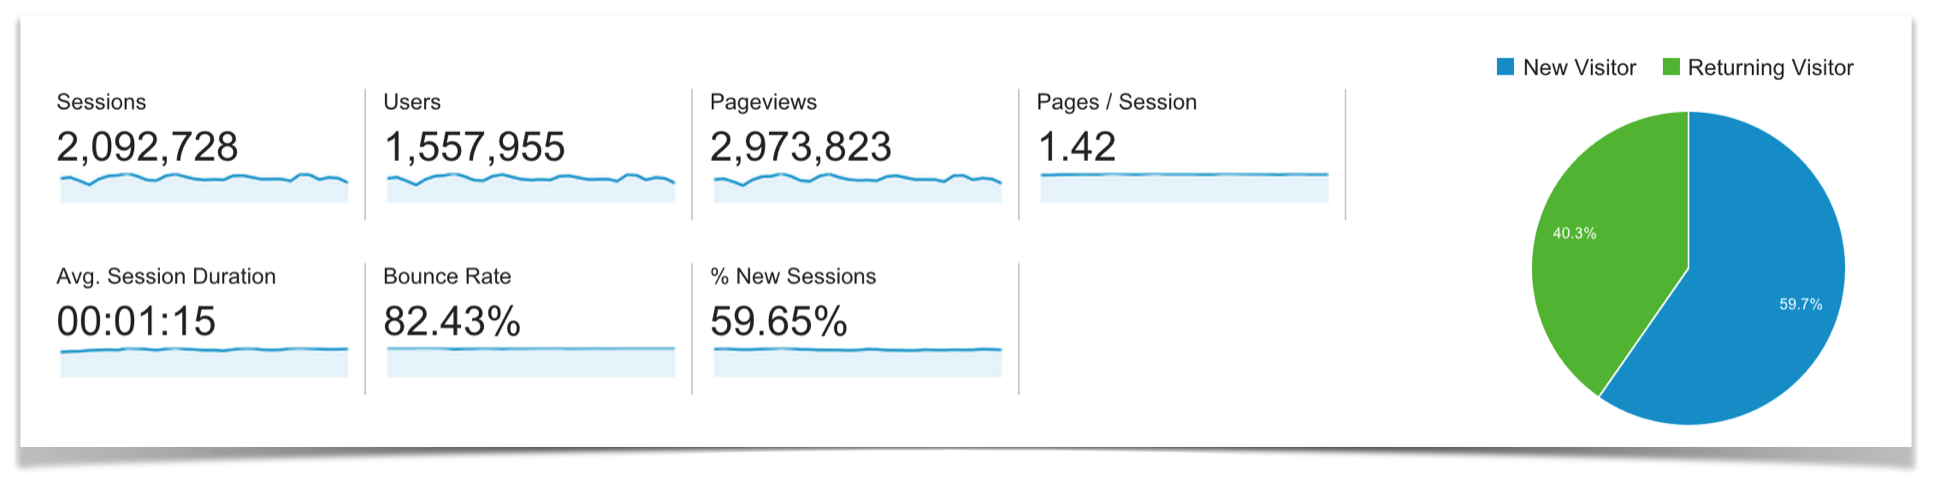 Google Analytics Total Traffic Stats for Pinch of Yum.